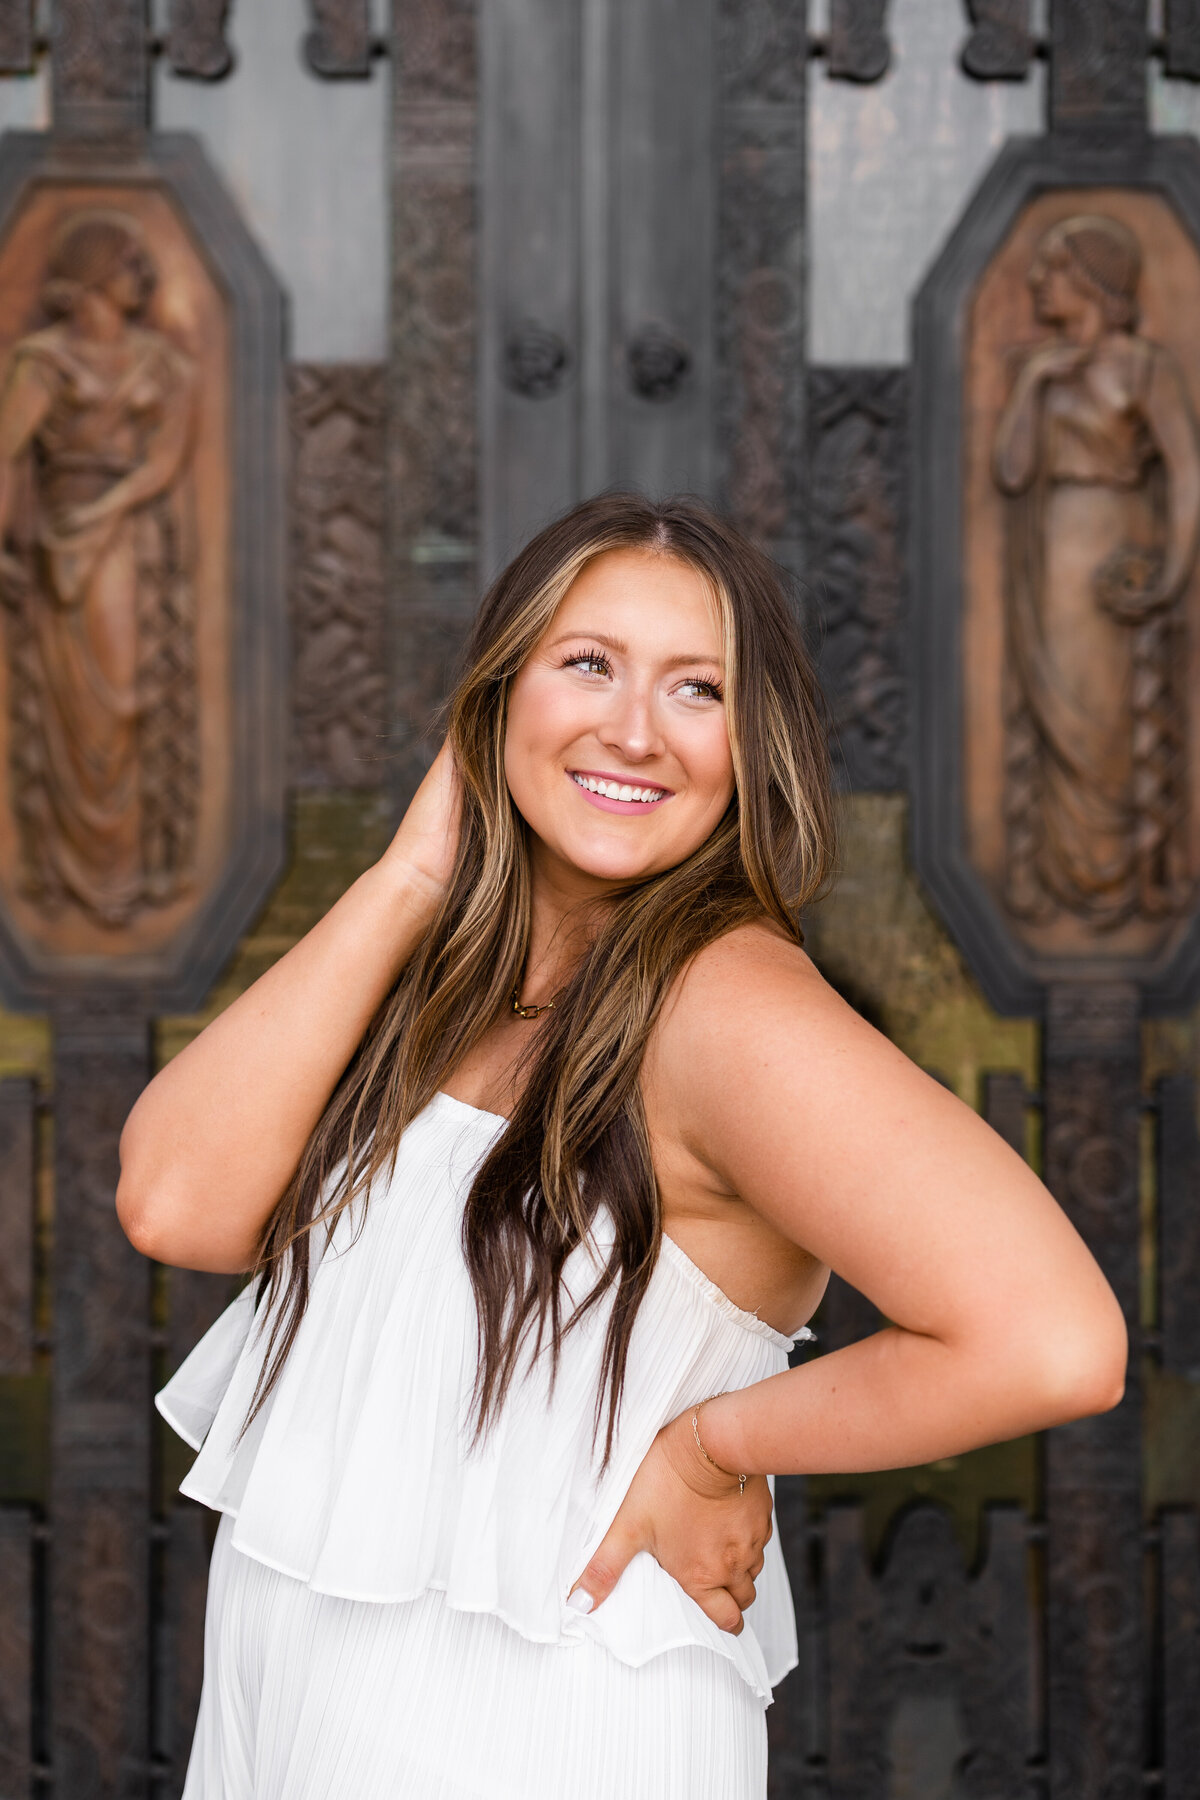 Texas A&M Senior girl smiling over shoulder with hand on hip and in hair while wearing white dress in front of the Administration Building front doors